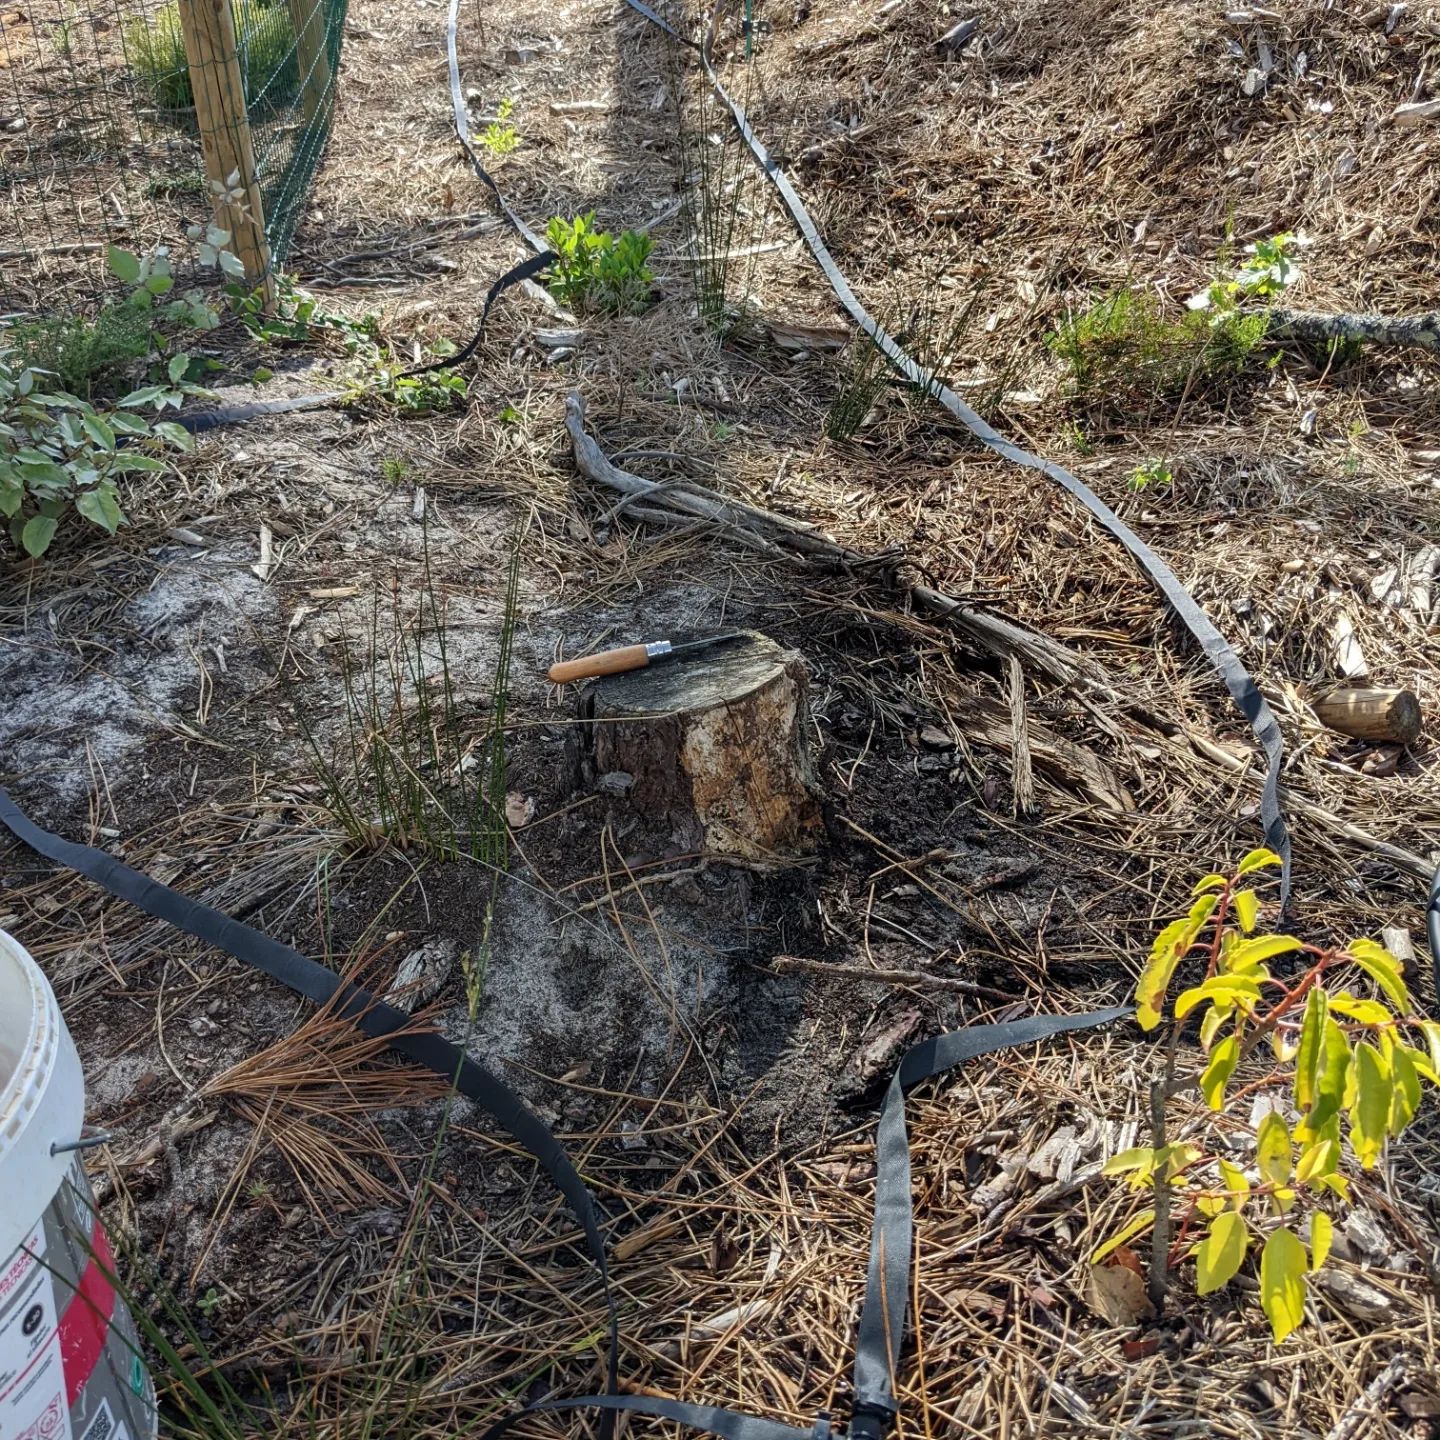 Installing #soakerhose along perimeter lines that are difficult to reach with sprinklers